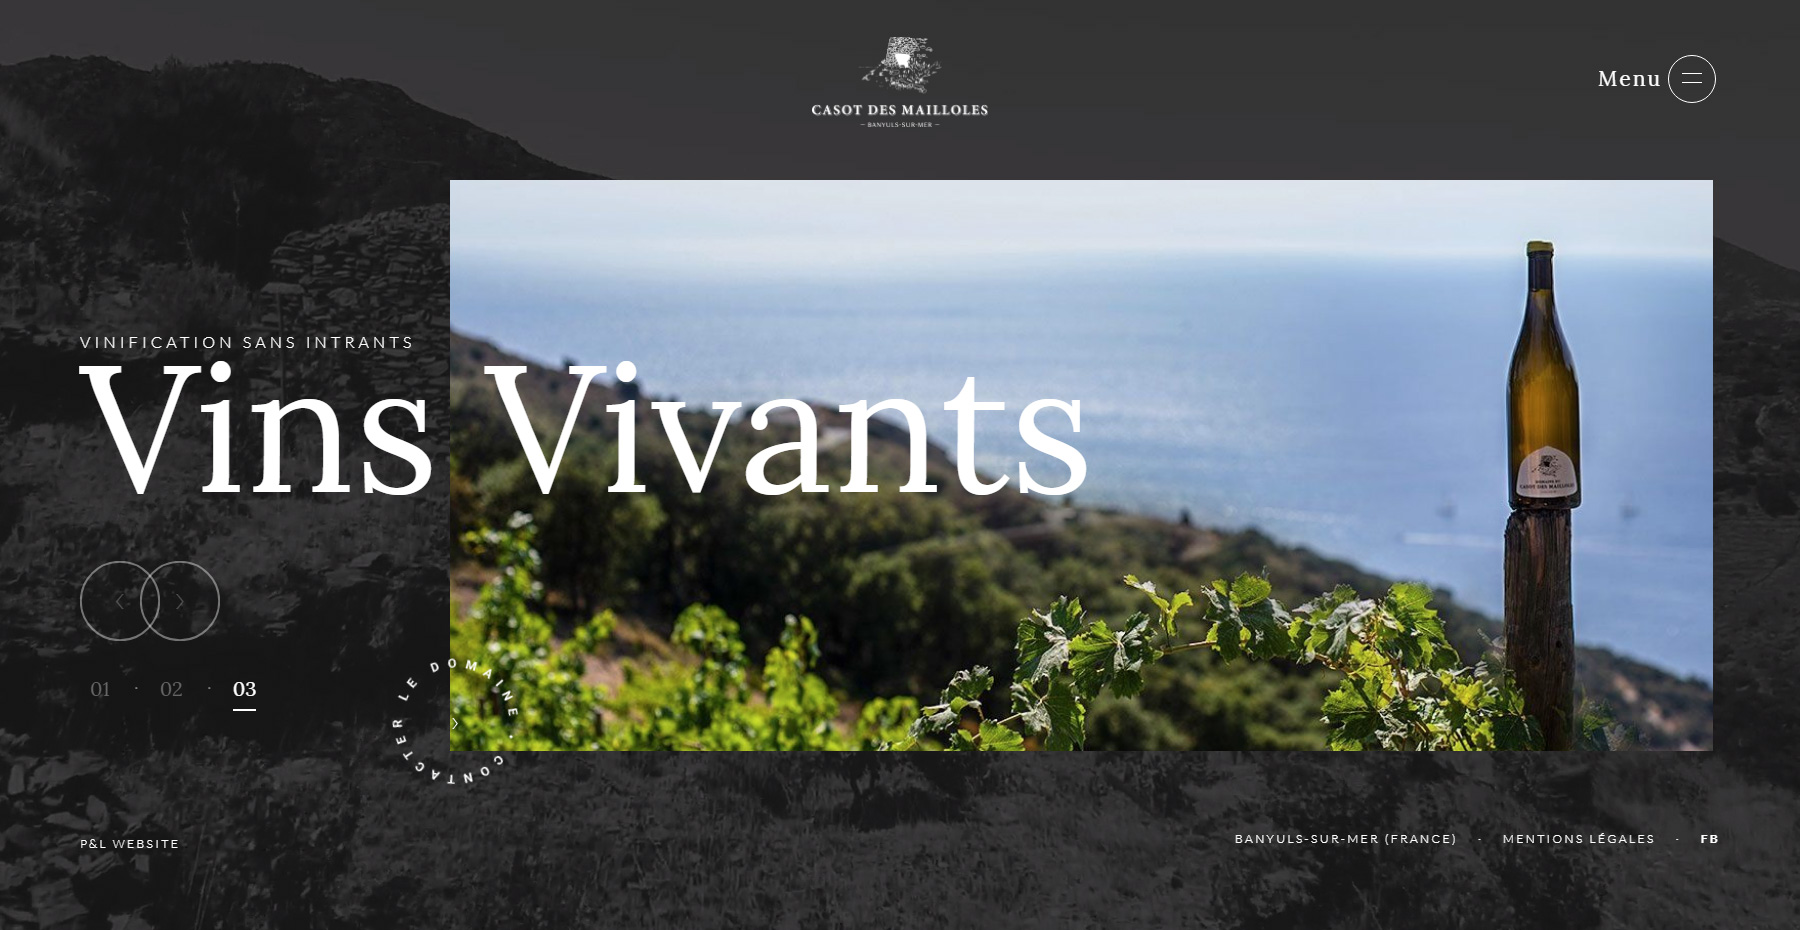 Casot des Mailloles - French Wine - Website of the Day